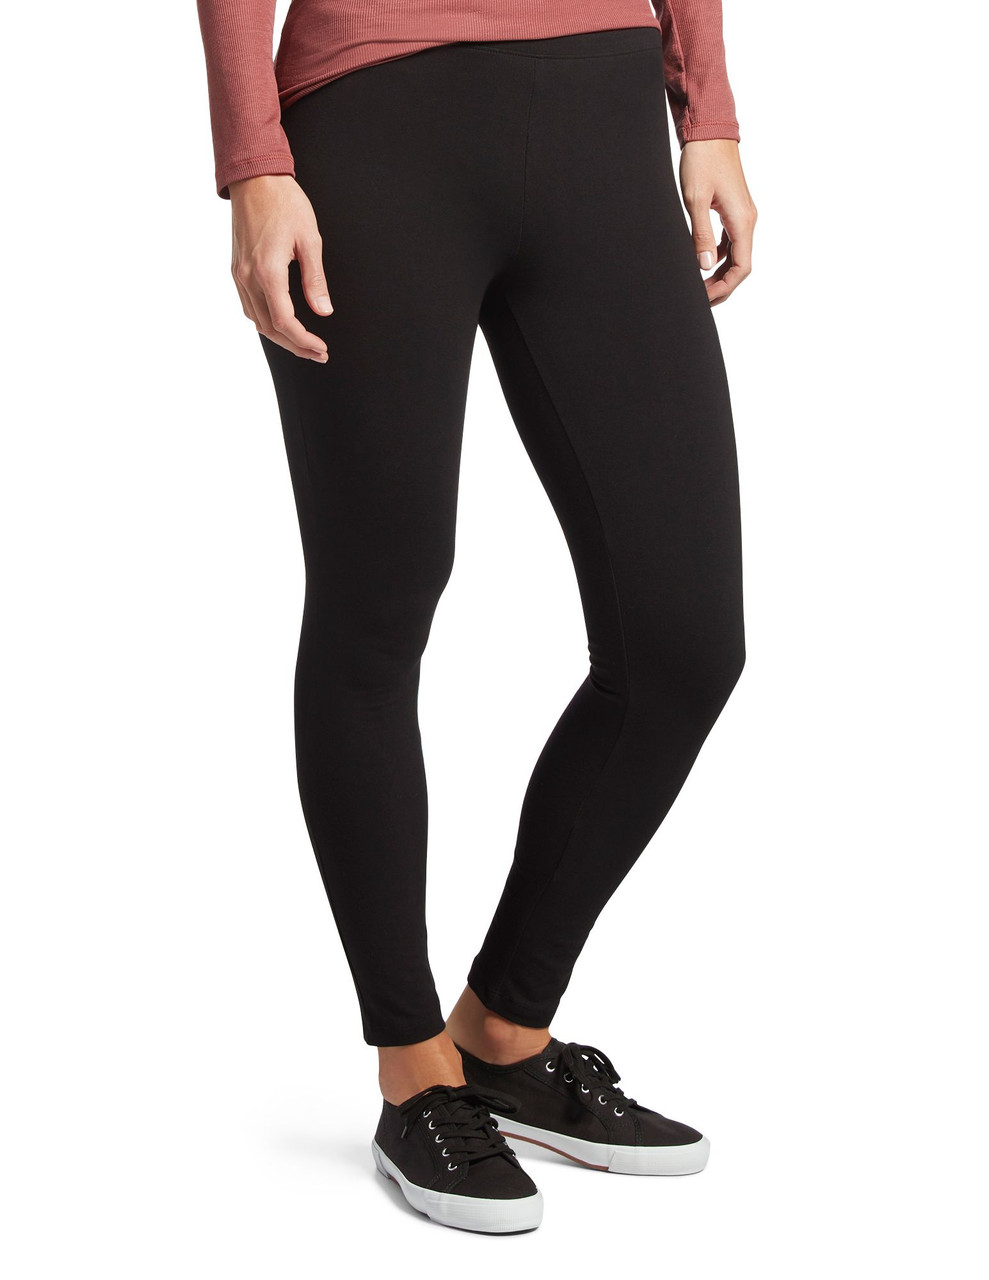 LEGGINGS WITH COTTON TAPE FOR WOMEN FIT UP TO SEMI LARGE RANDOM.